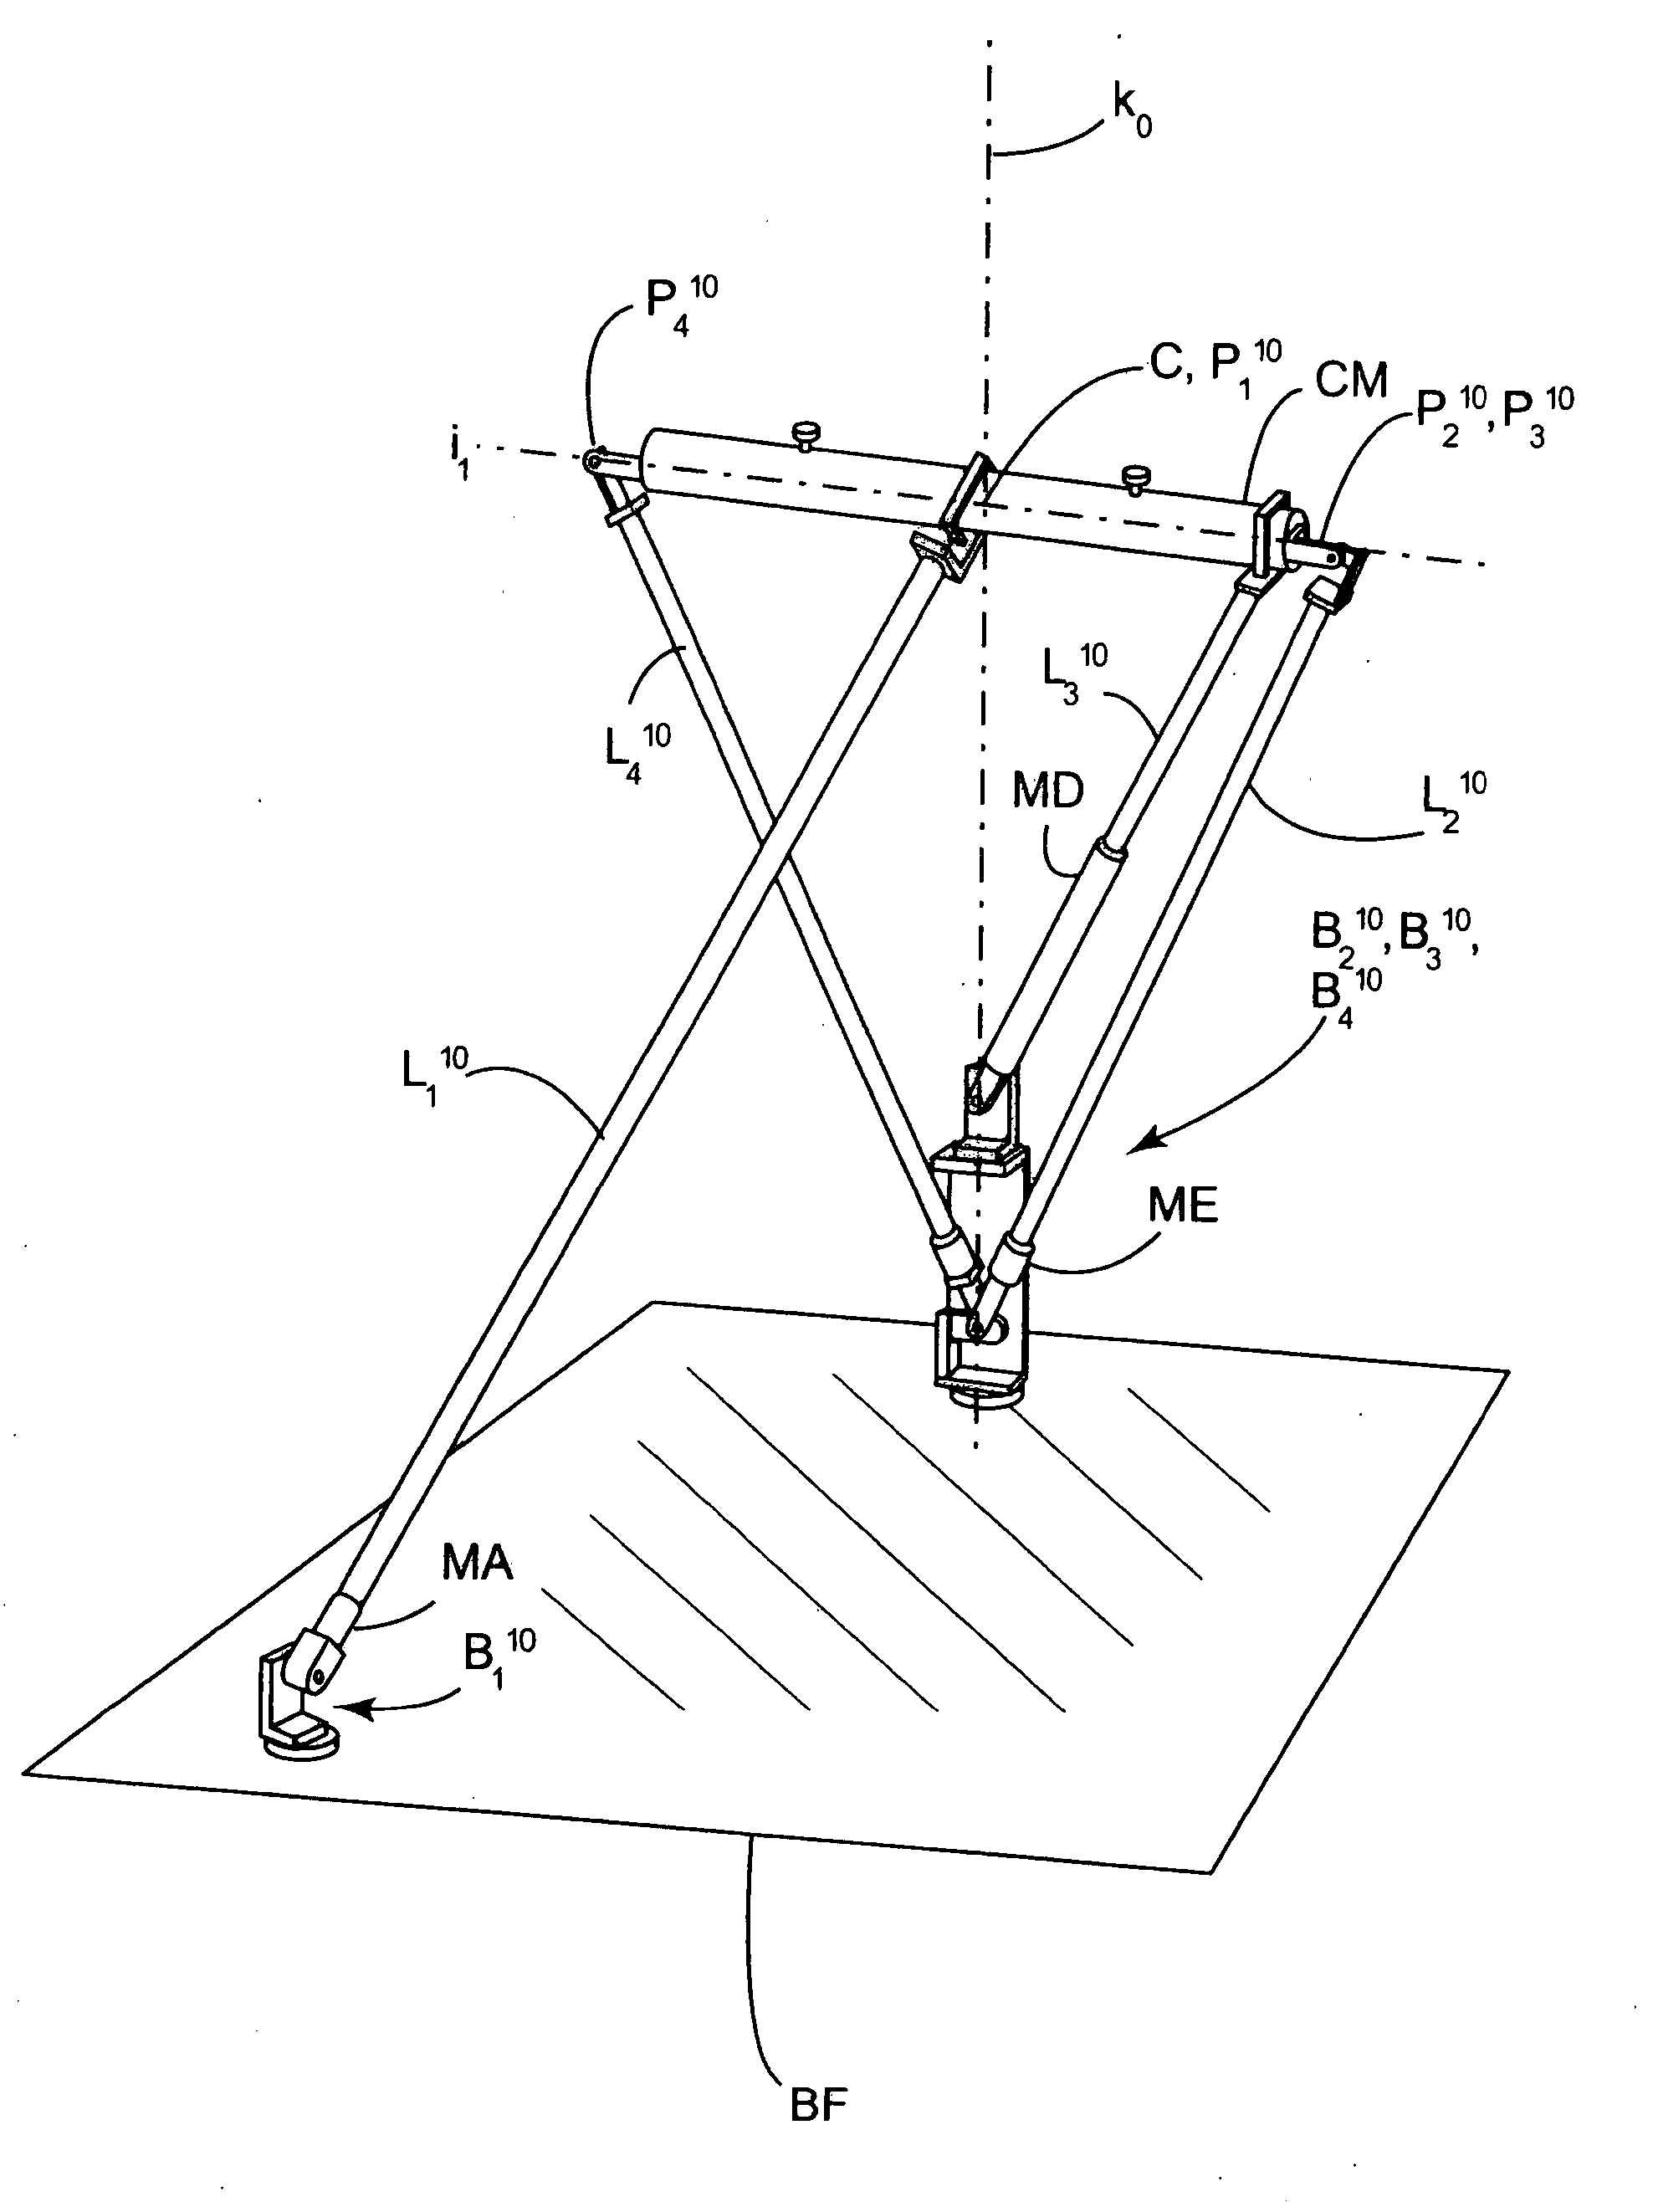 Parallel spherical mechanism with two degrees of freedom